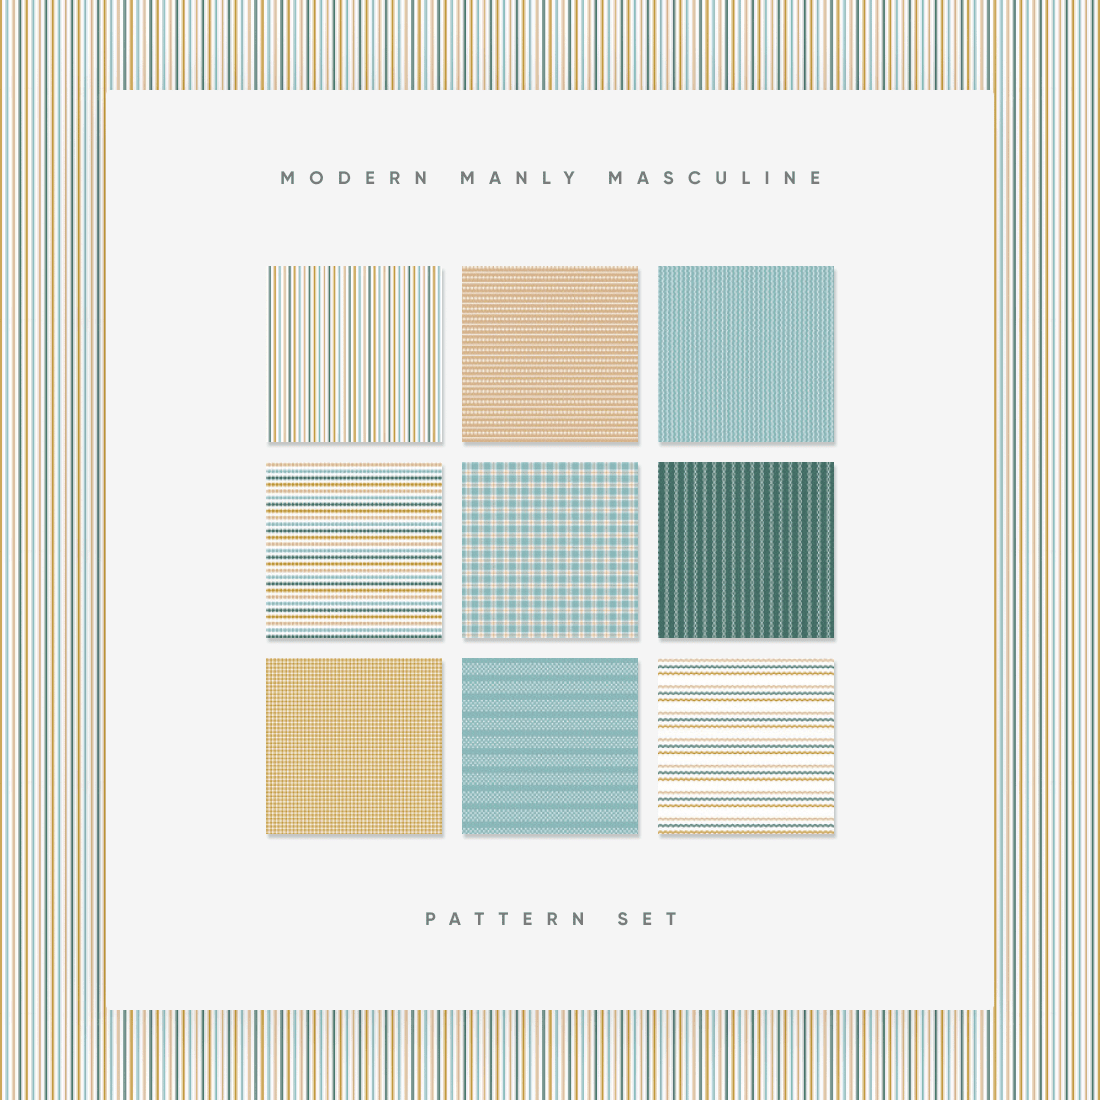 Modern Manly Masculine Pattern Set cover.